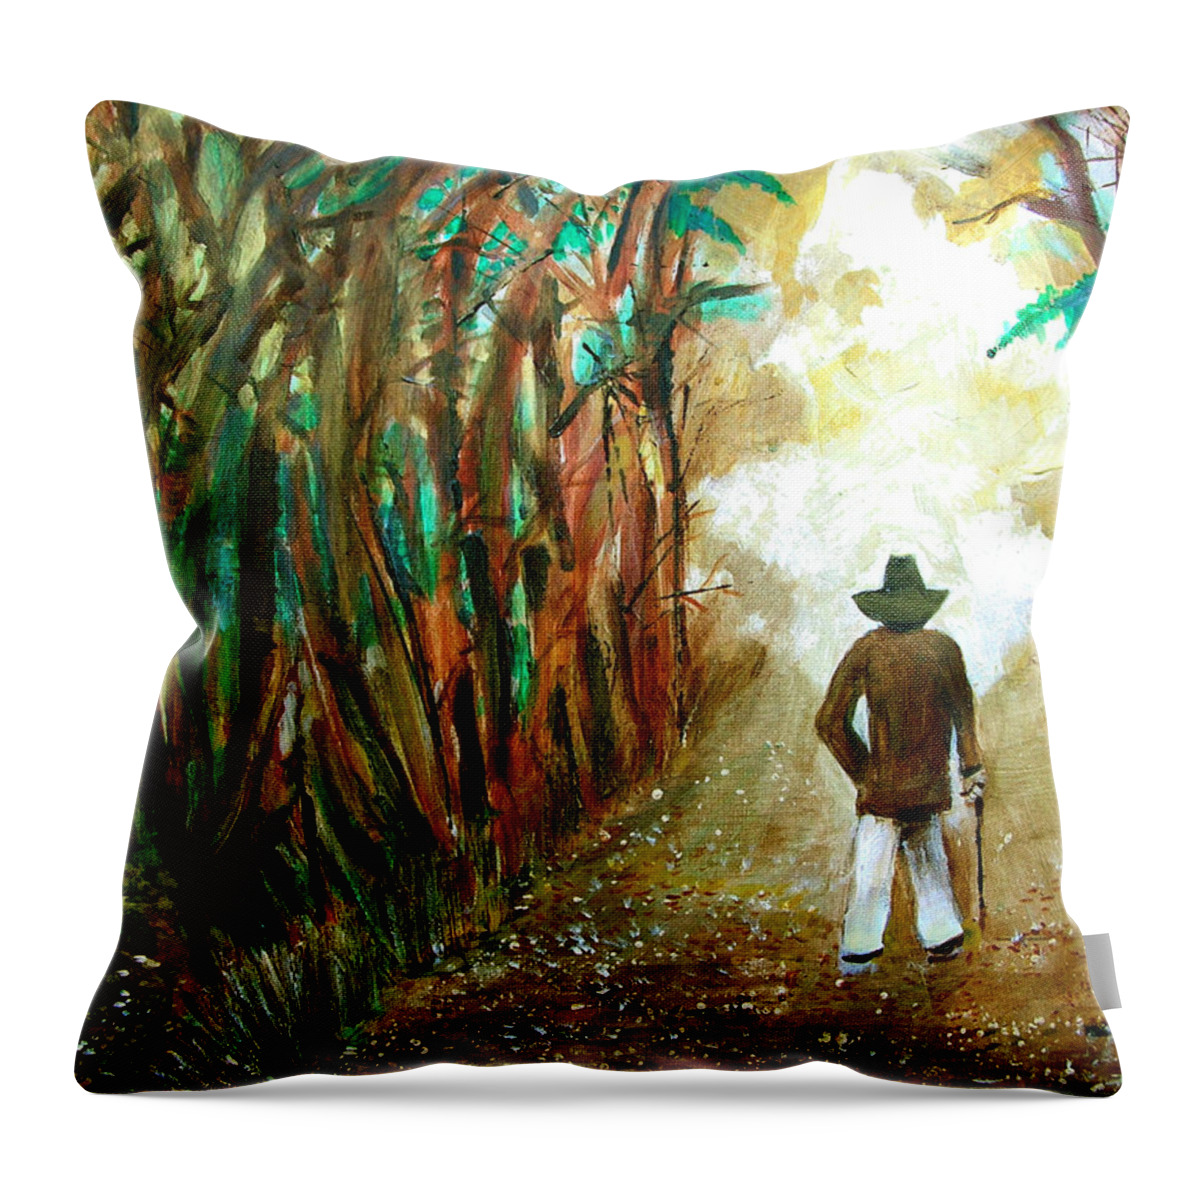 A Fall Walk In The Woods Throw Pillow featuring the painting A Fall Walk in the Woods by Seth Weaver